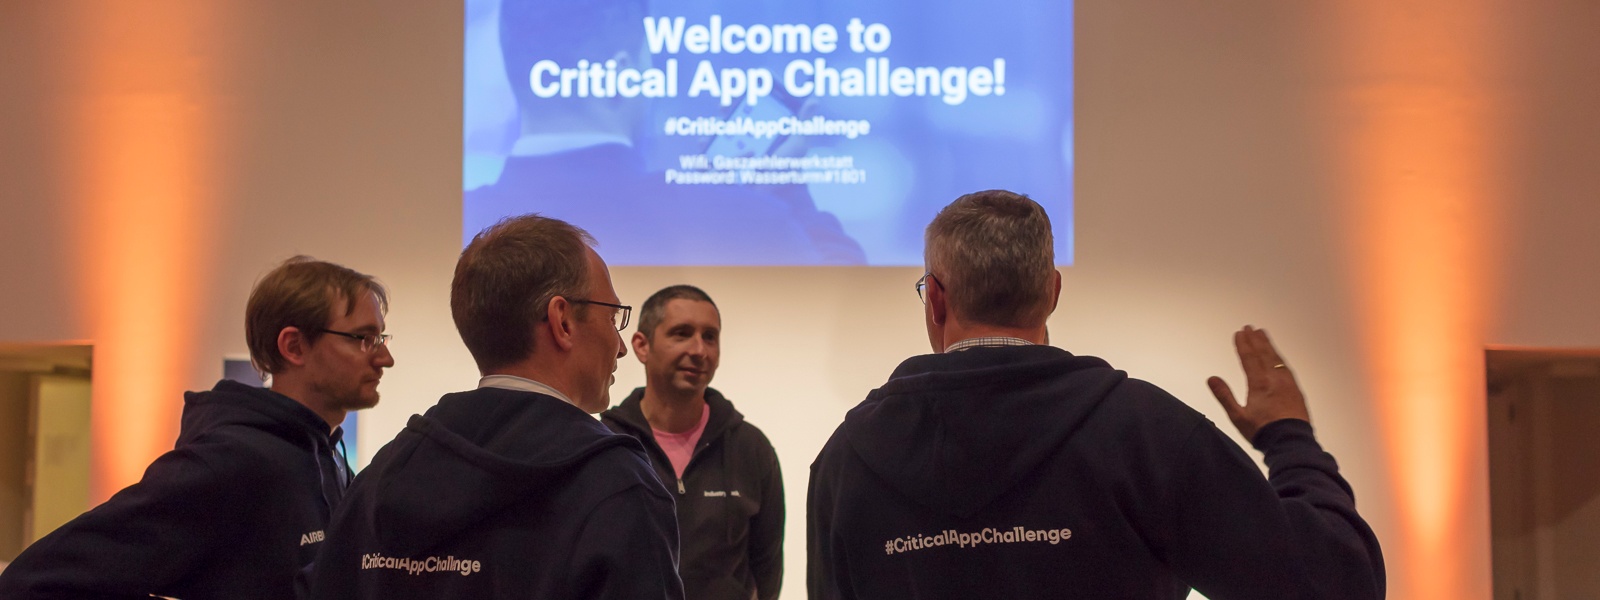 Airbus Hackathon event in Germany #CritAppChallenge